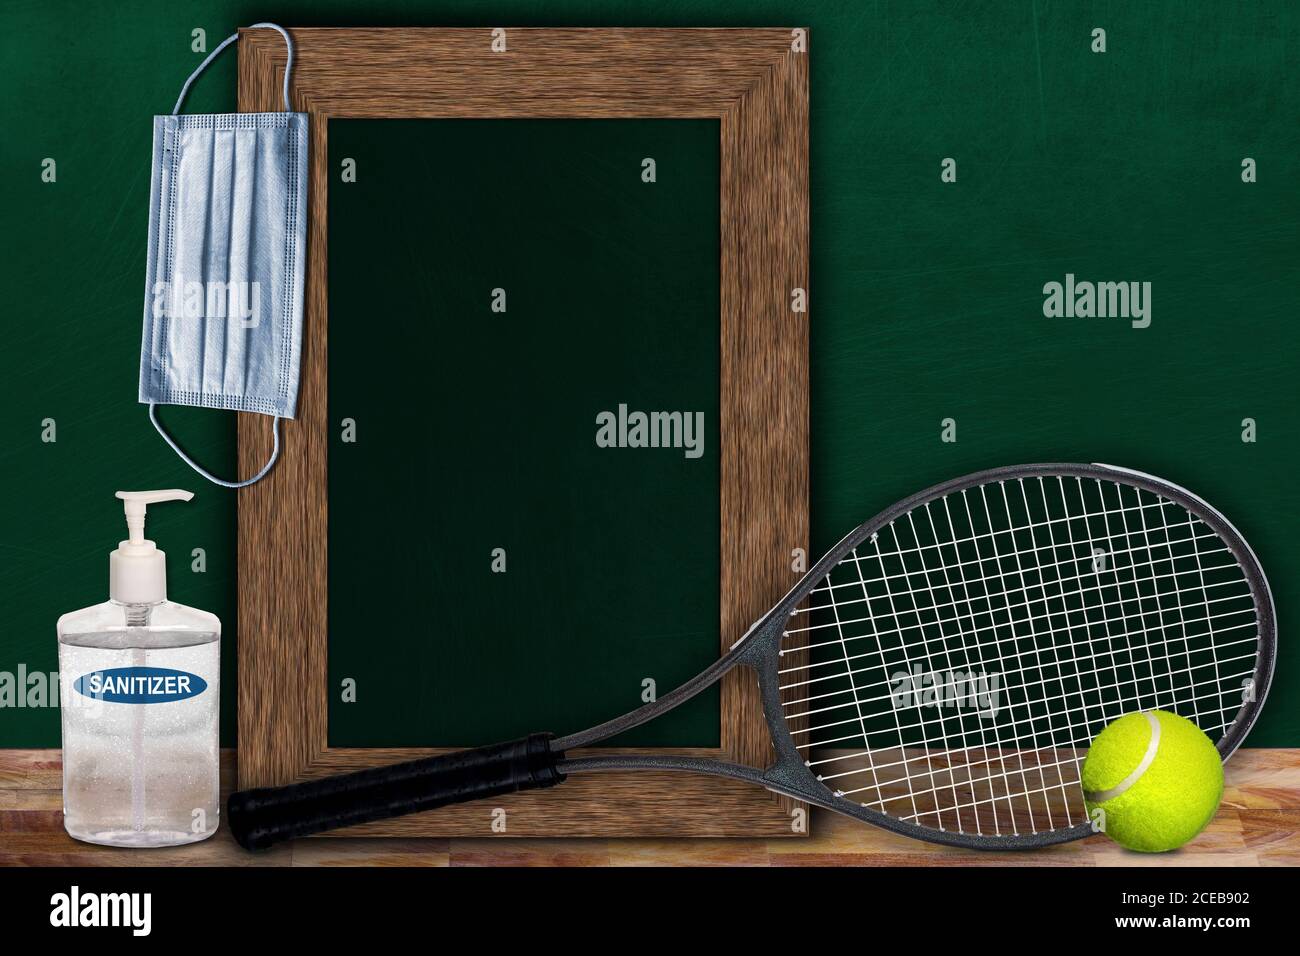 COVID-19 new normal sports concept in a classroom setting showing framed chalkboard with copy space and tennis racket and ball on wooden table. Stock Photo